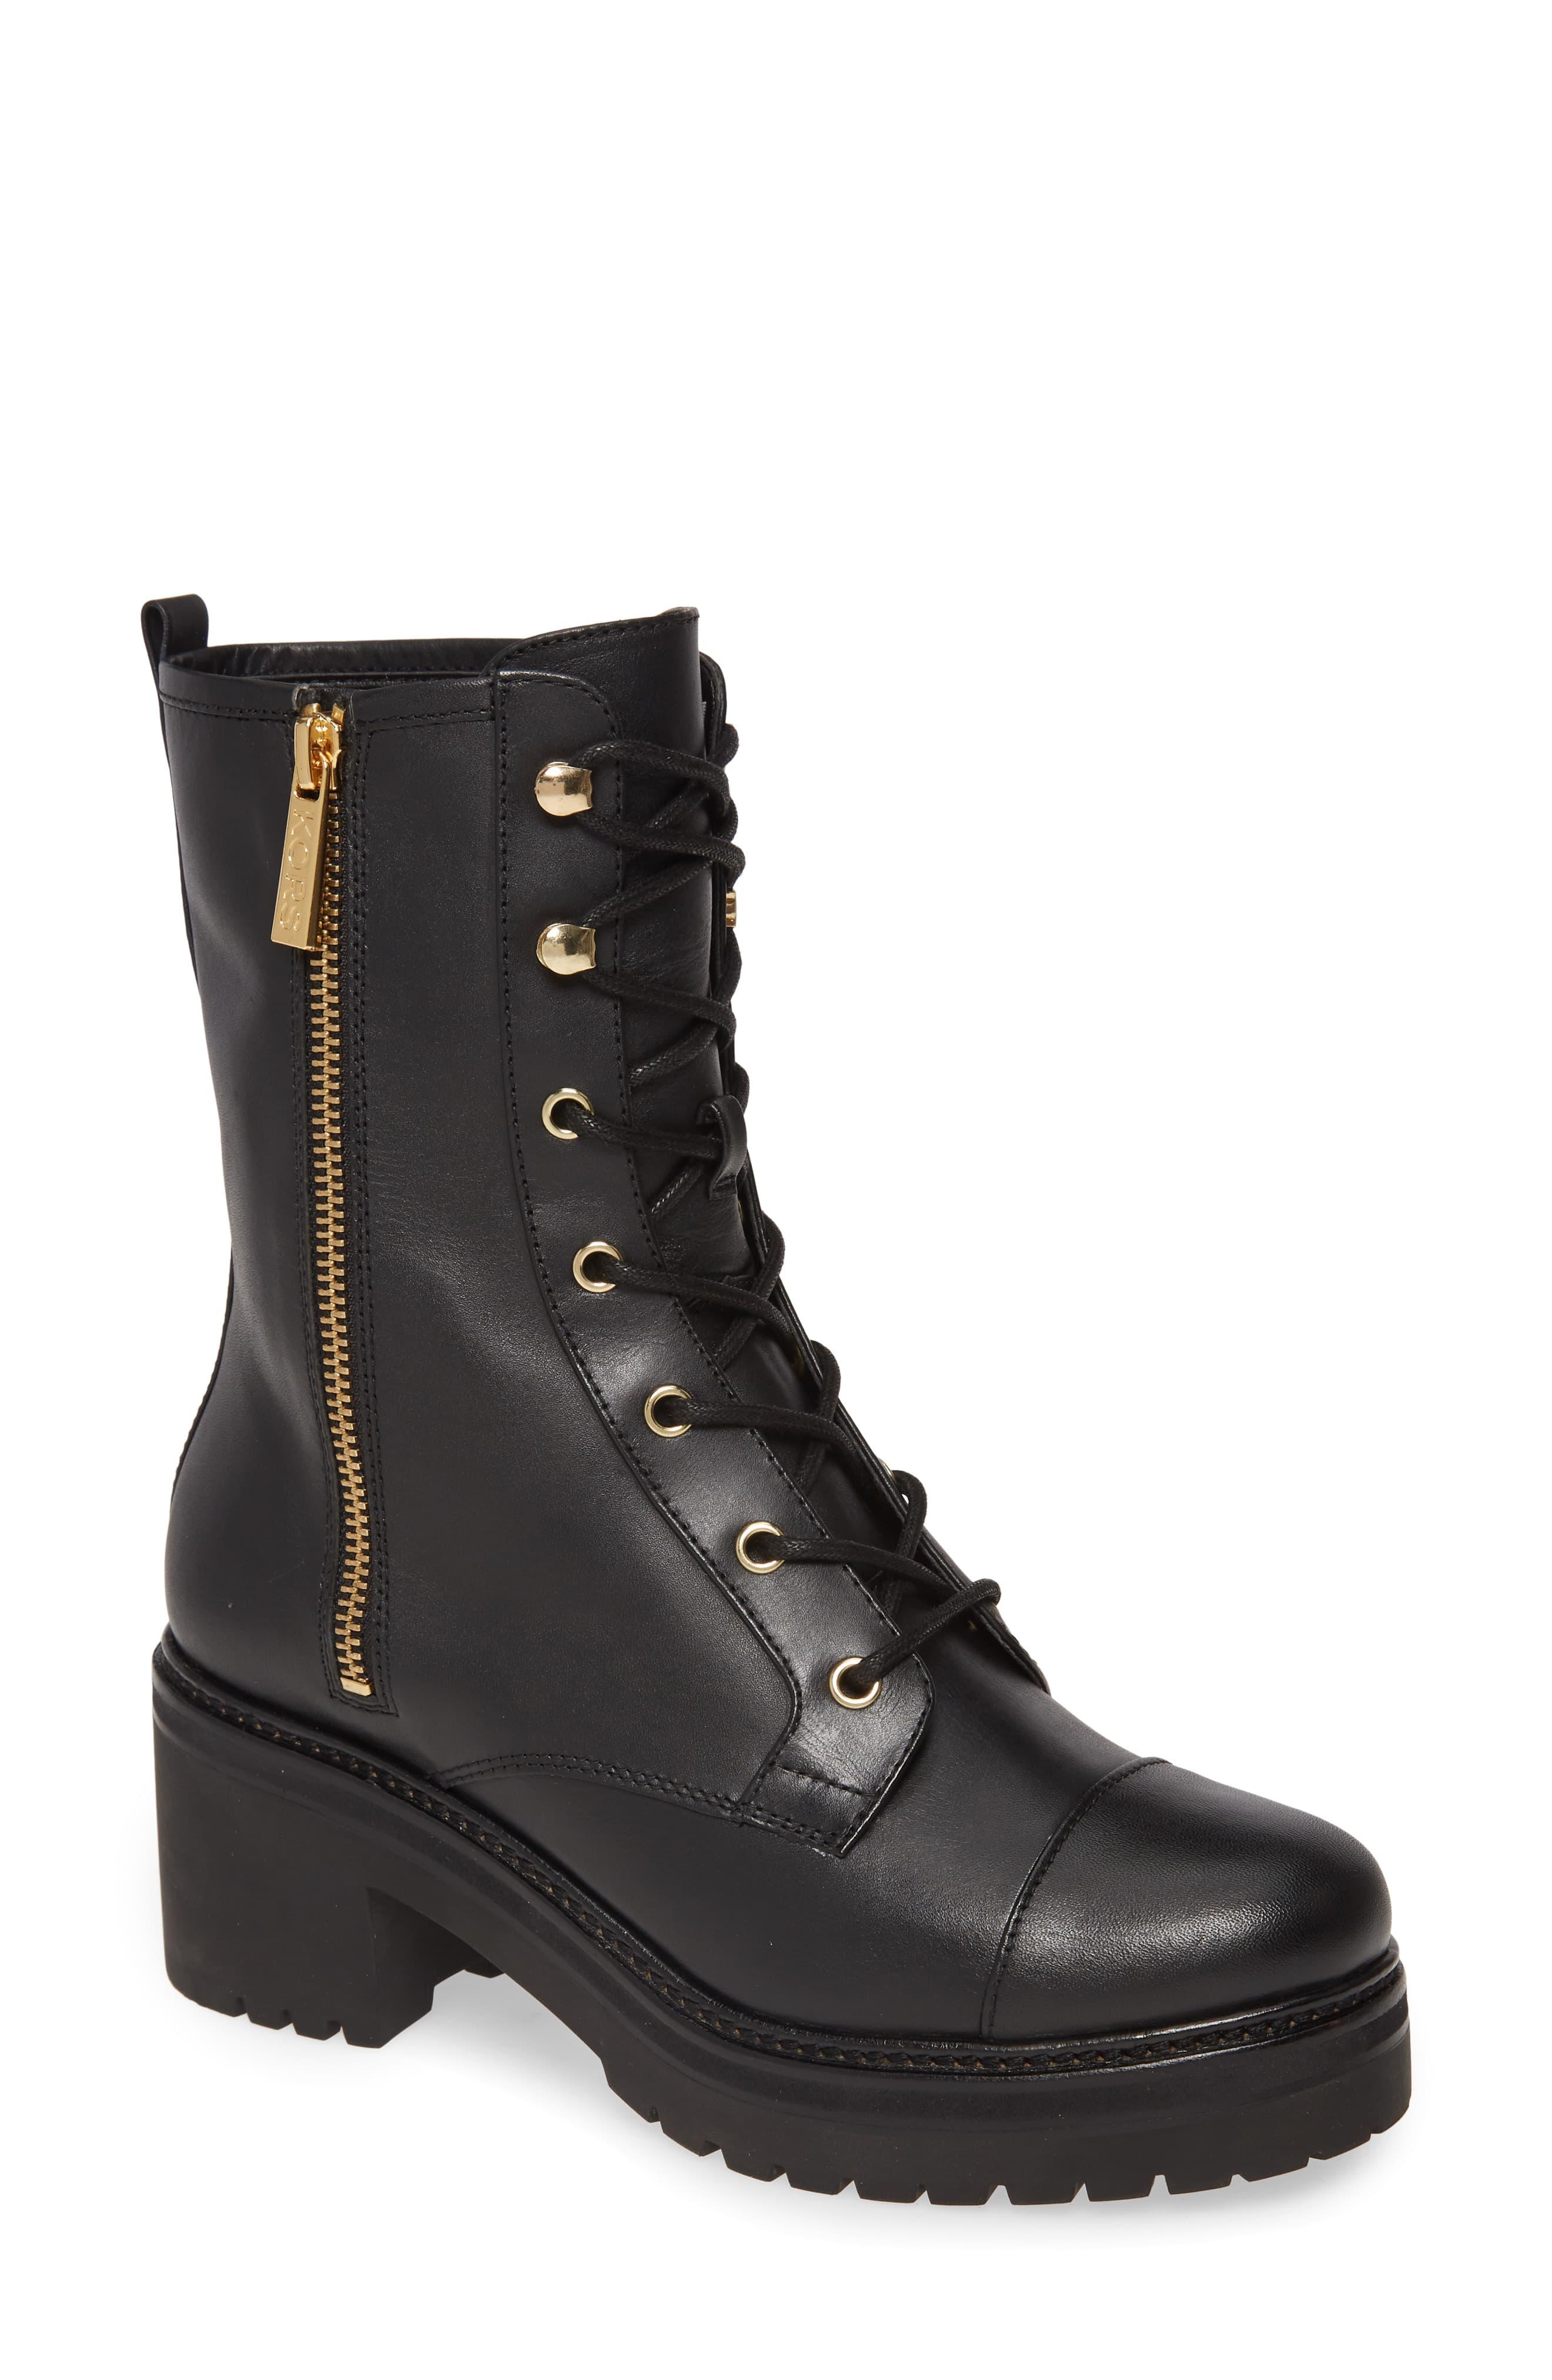 MICHAEL Michael Kors Anaka Lace-up Boot in Black - Lyst